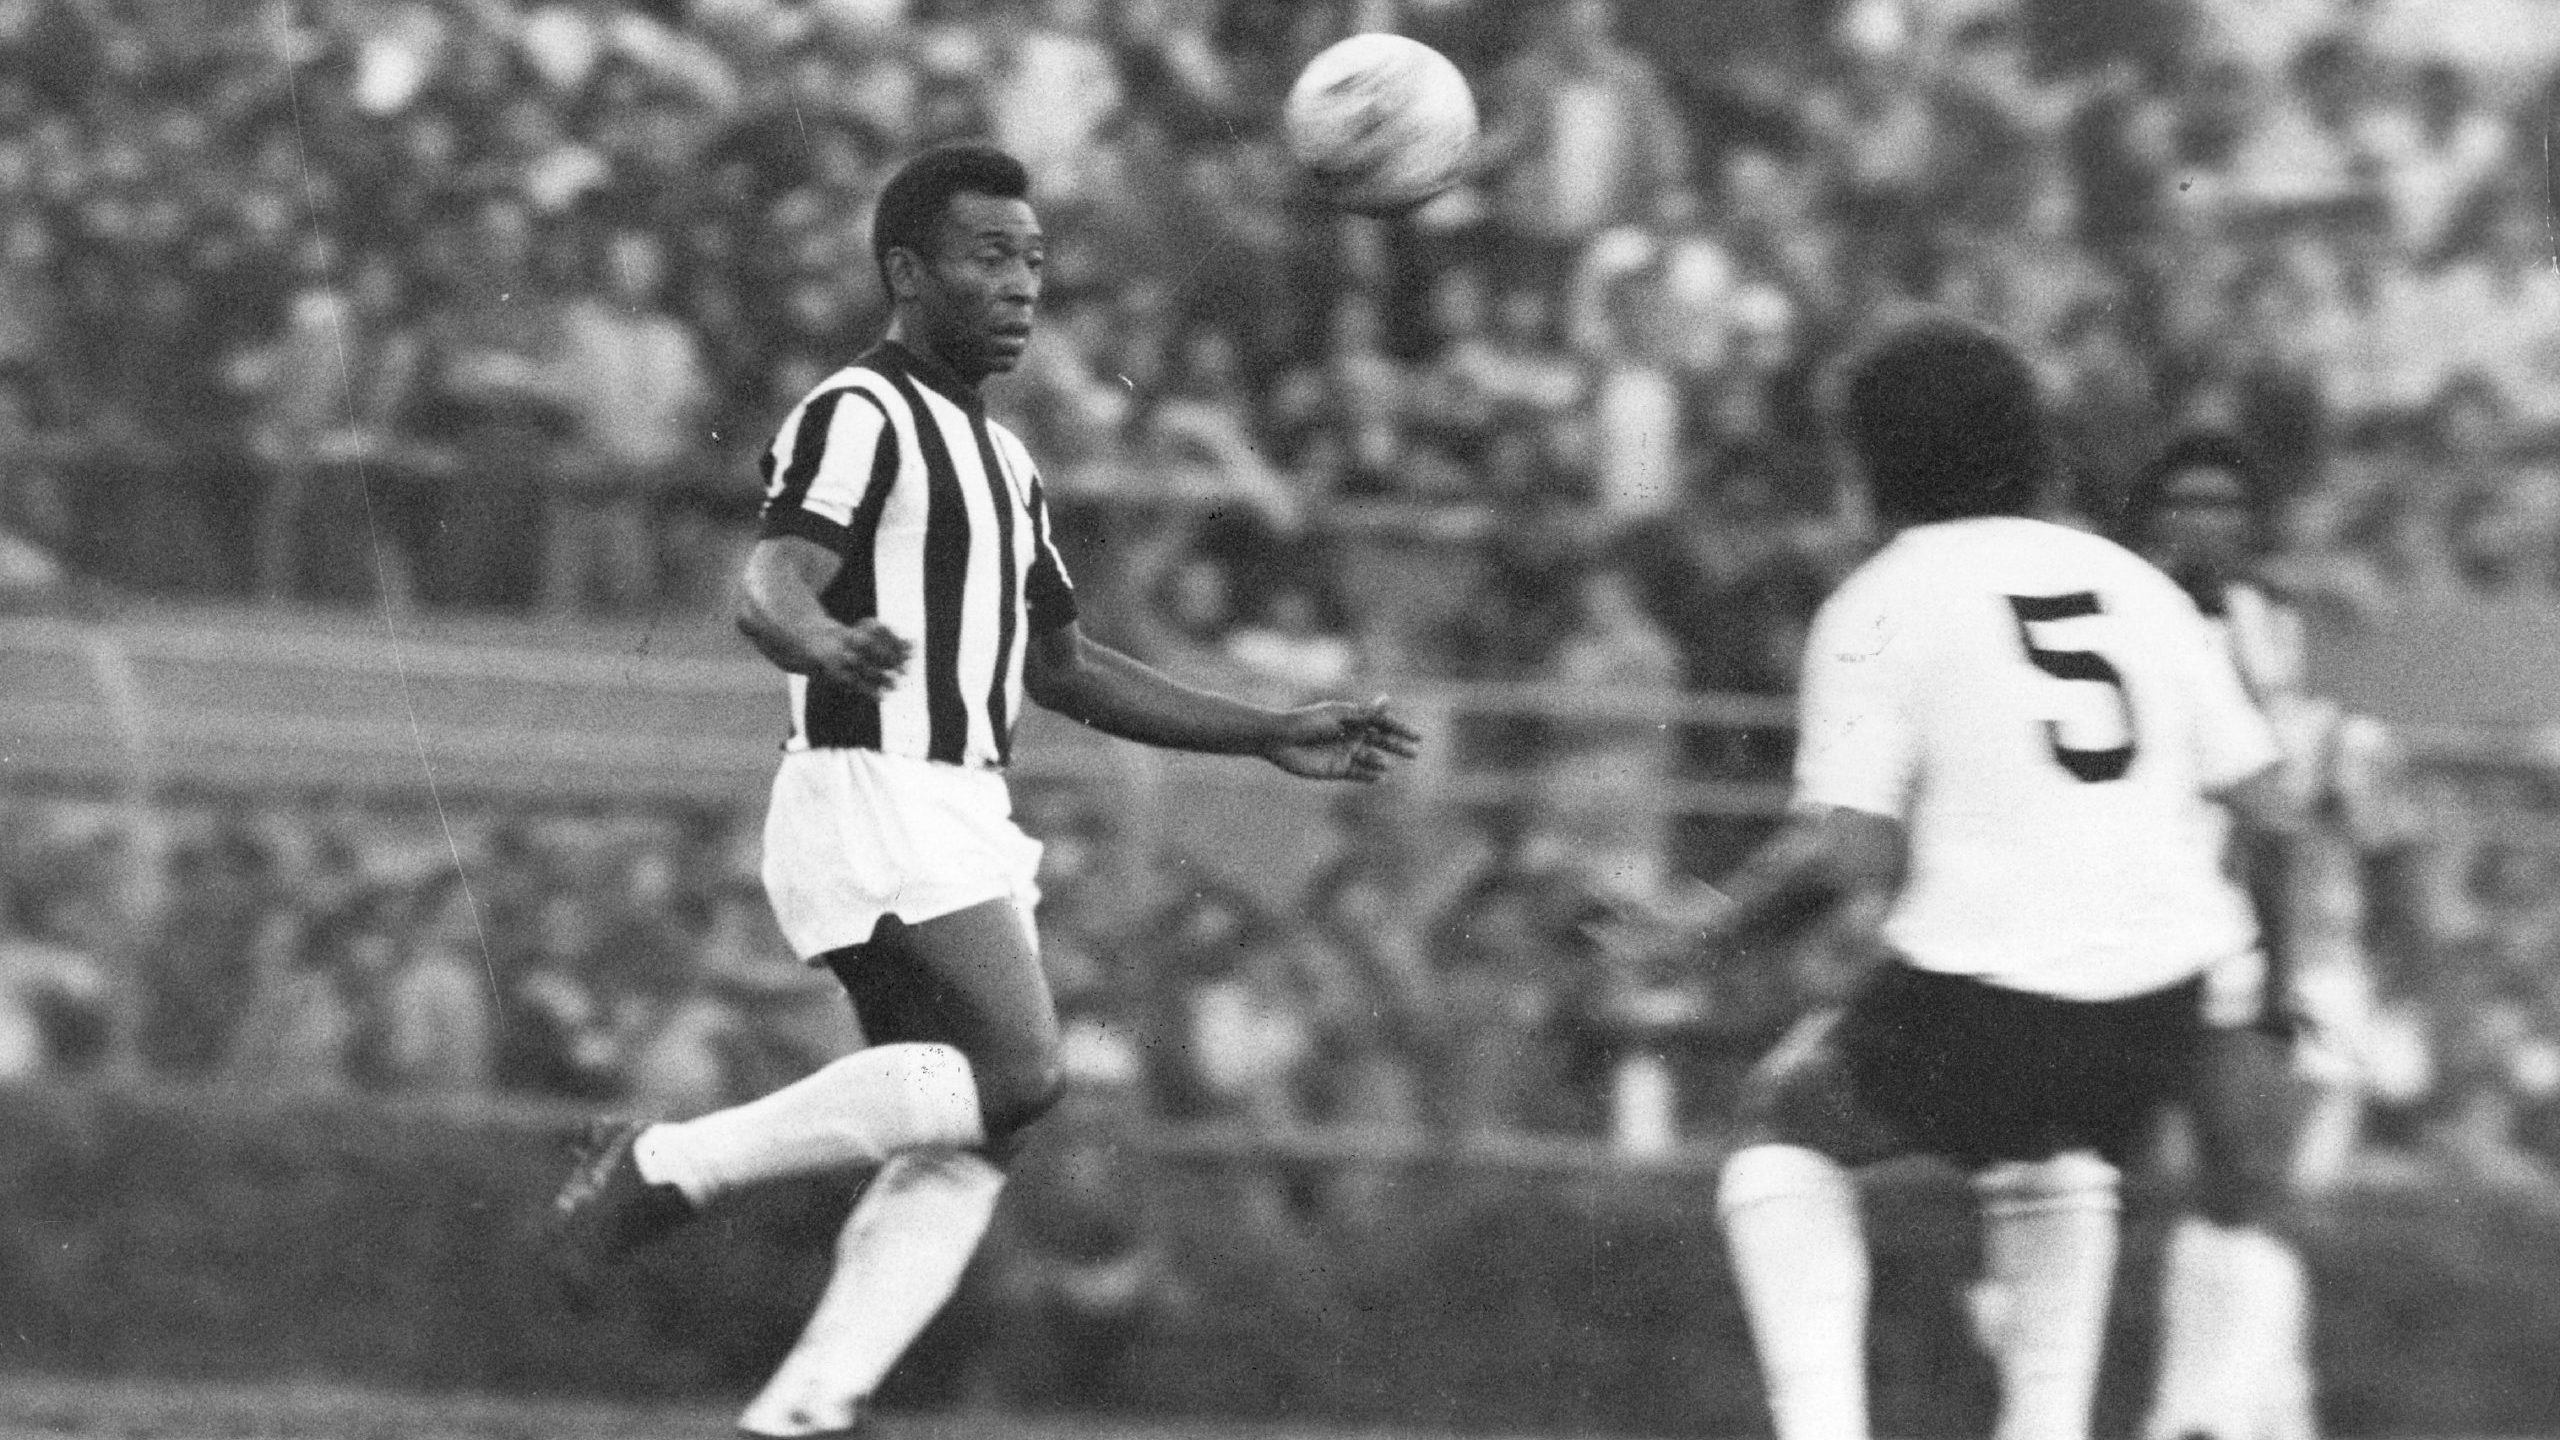 Only after Pele, a 15-year-old sensation started scoring goals for the city's team did Santos, a ci...